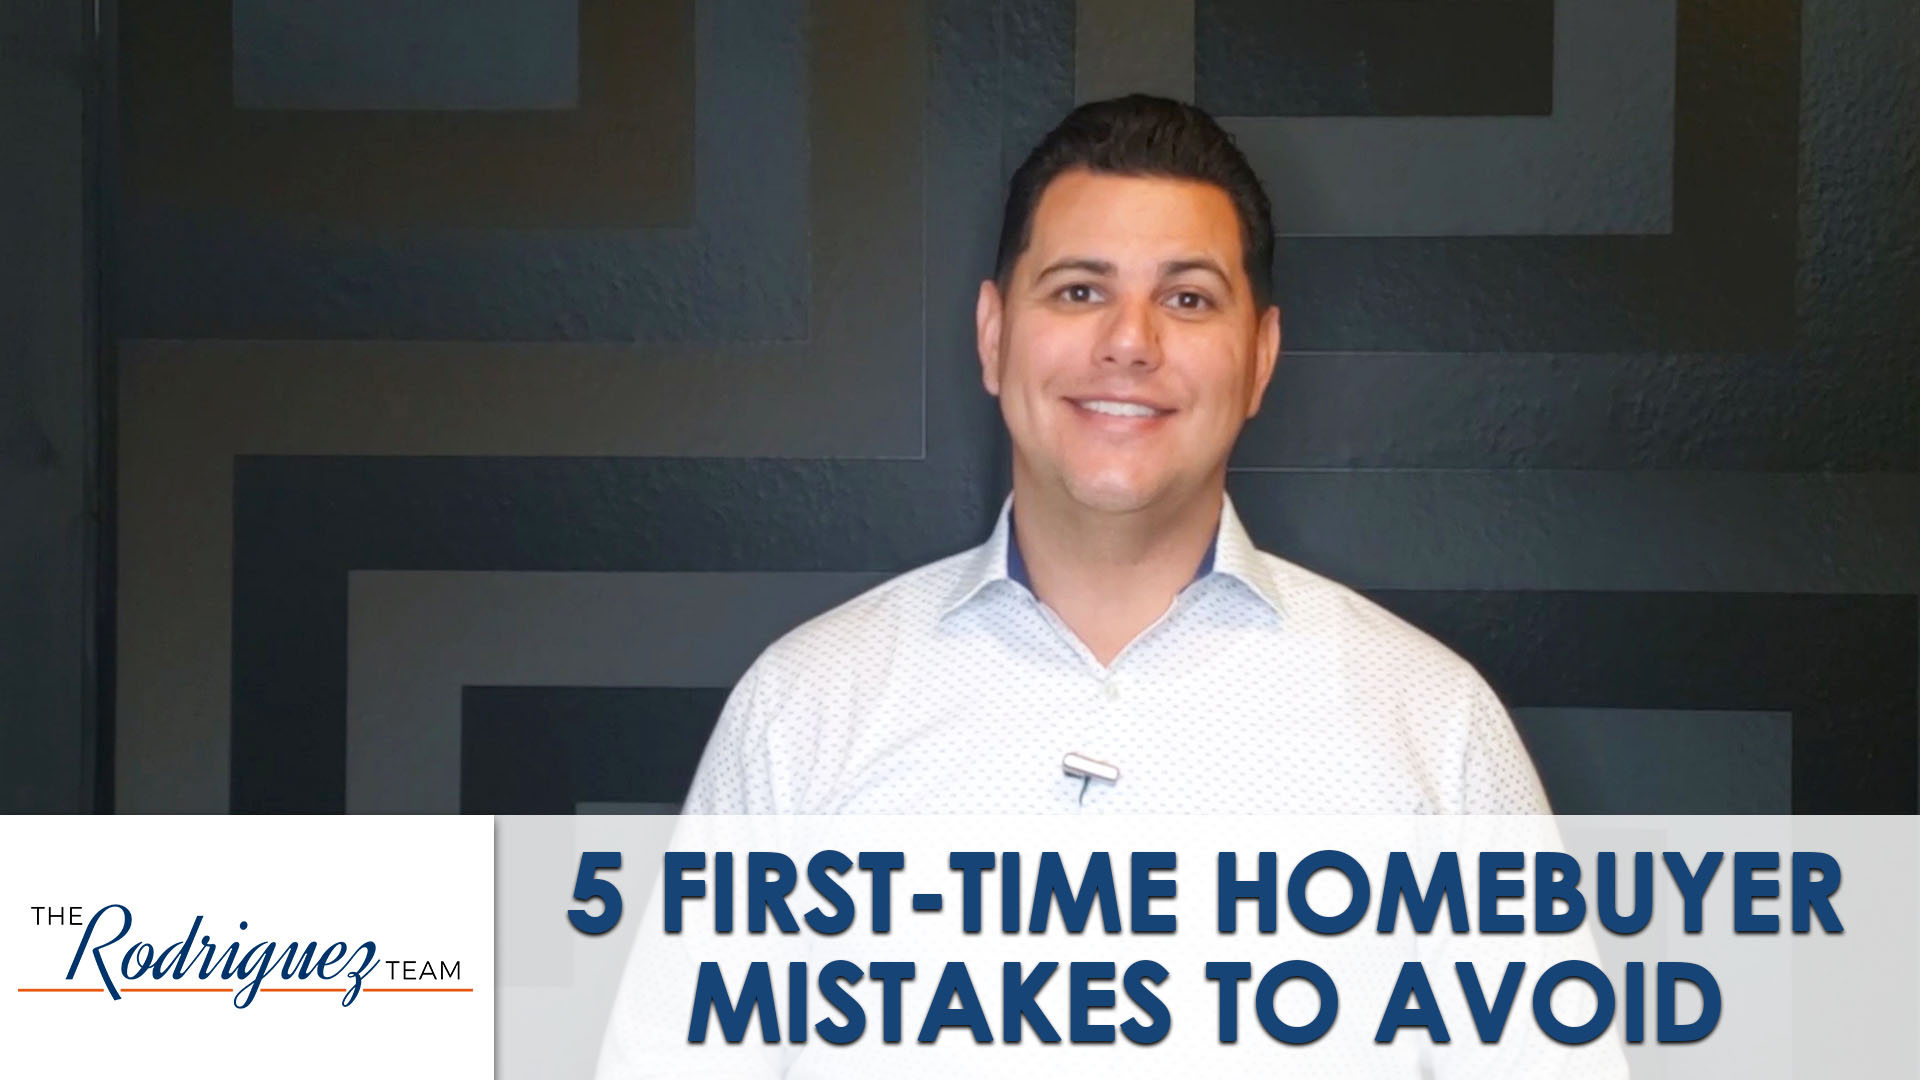 Don’t Make These Mistakes as a Homebuyer